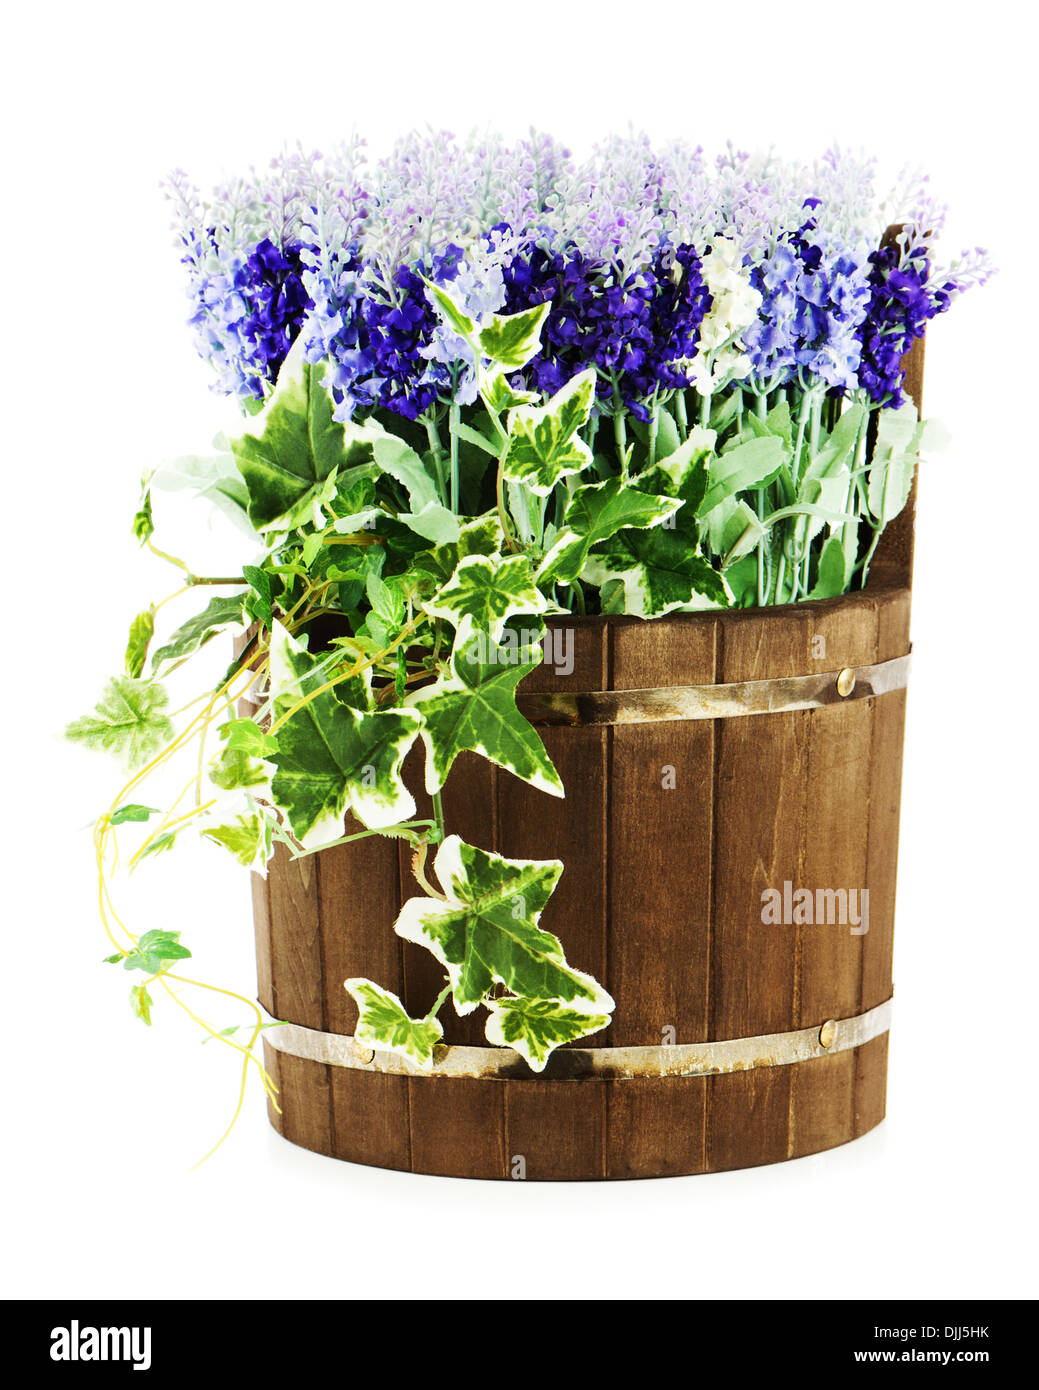 Composition of artificial flowers in old wooden barrel isolated on white background. Closeup. Stock Photo